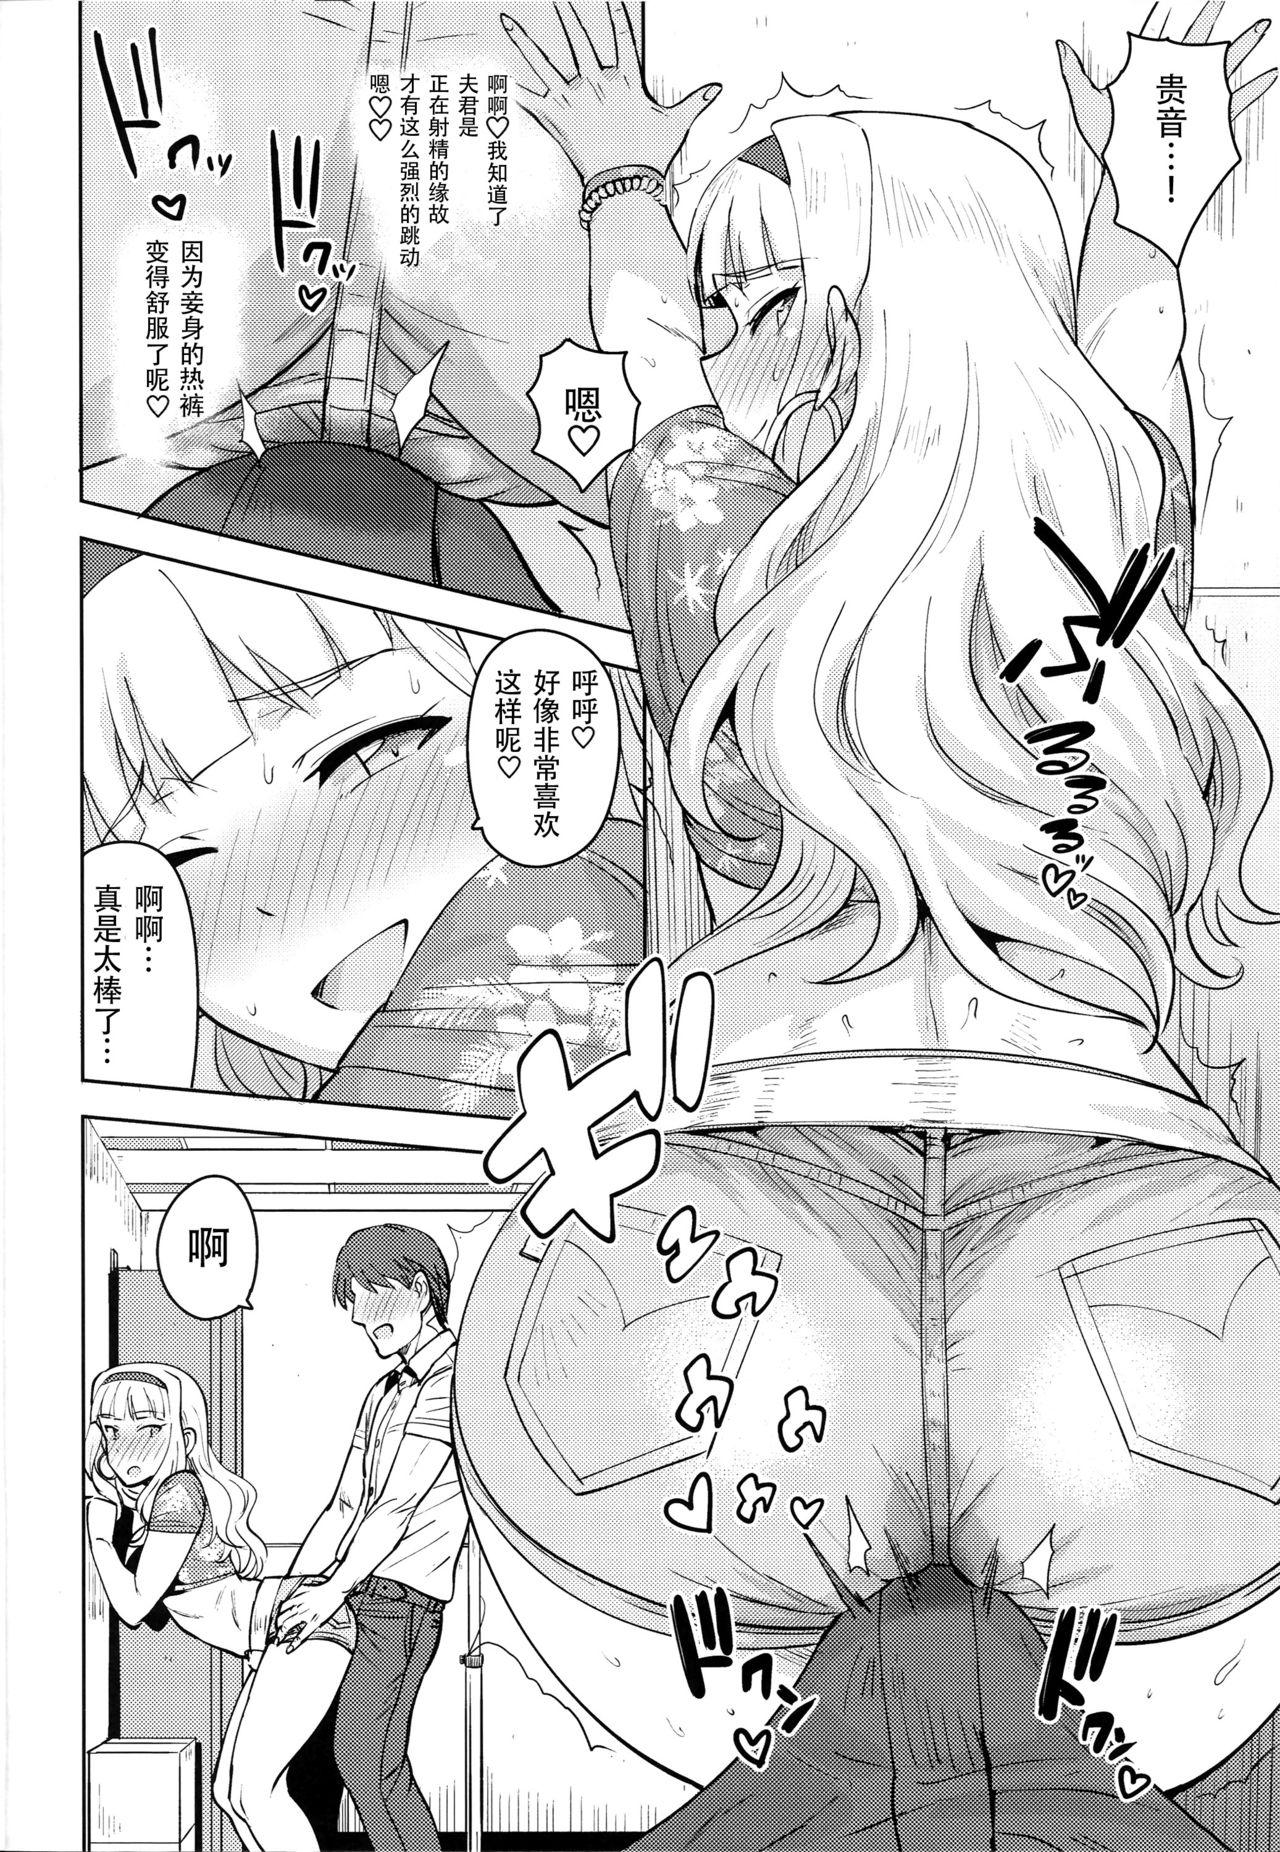 Speculum SWEET MOON 3 - The idolmaster Blow Job - Page 12